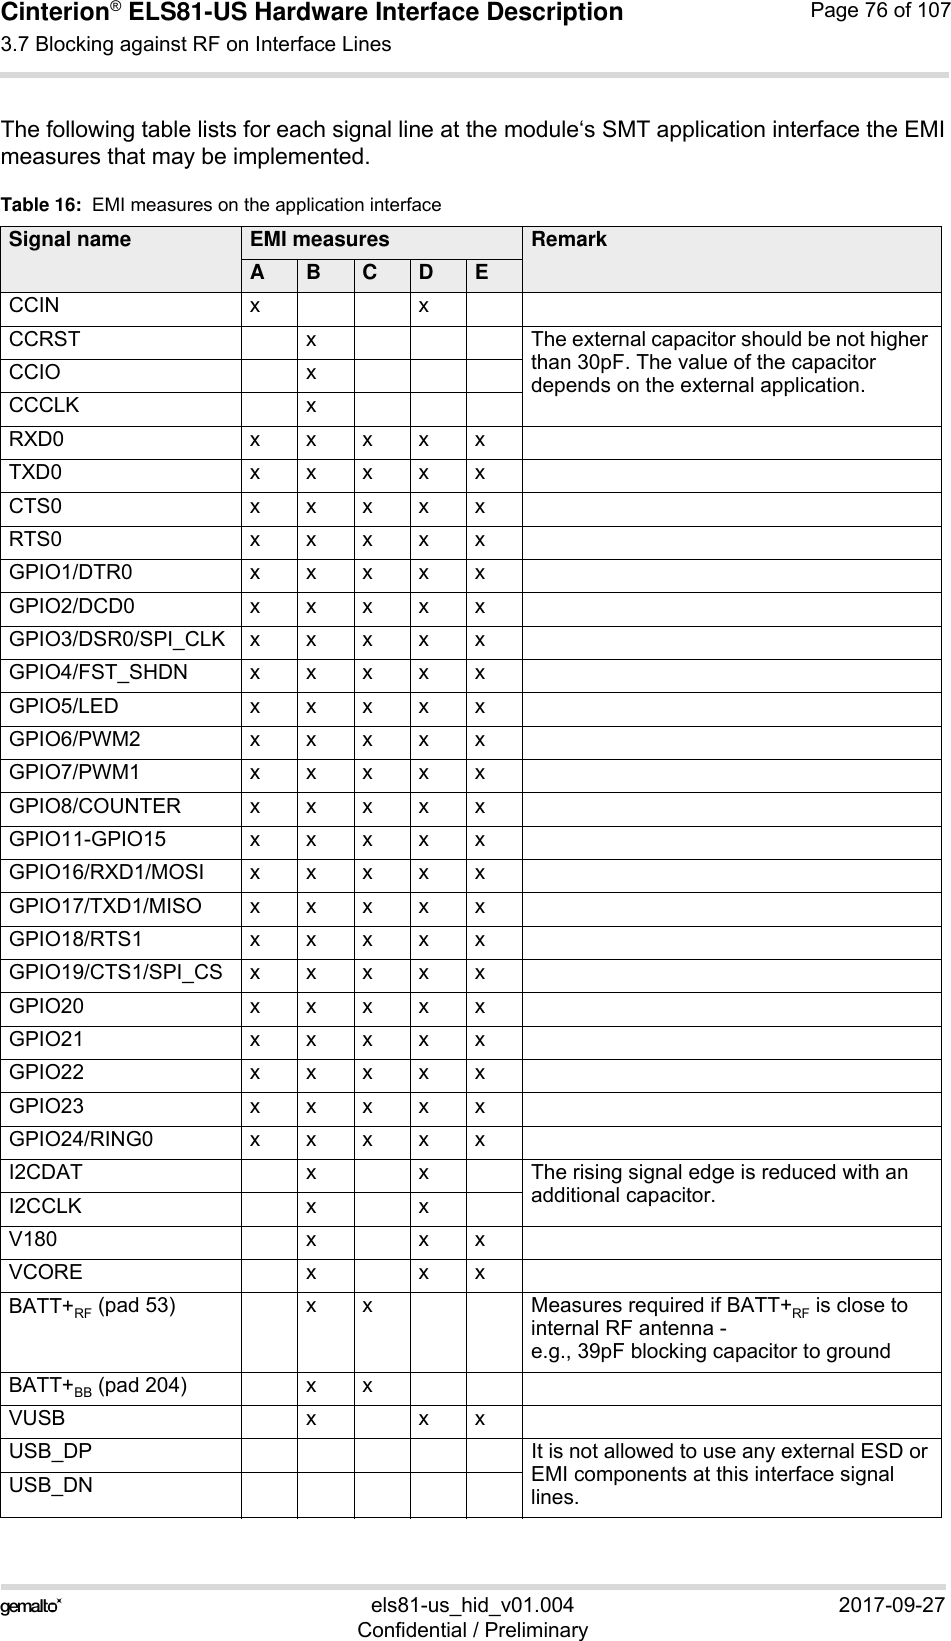 Cinterion® ELS81-US Hardware Interface Description3.7 Blocking against RF on Interface Lines77els81-us_hid_v01.004 2017-09-27Confidential / PreliminaryPage 76 of 107The following table lists for each signal line at the module‘s SMT application interface the EMImeasures that may be implemented.Table 16:  EMI measures on the application interfaceSignal name EMI measures RemarkABCDECCIN x xCCRST x The external capacitor should be not higher than 30pF. The value of the capacitor depends on the external application.CCIO xCCCLK xRXD0 xxxxxTXD0 xxxxxCTS0 xxxxxRTS0 xxxxxGPIO1/DTR0 xxxxxGPIO2/DCD0 xxxxxGPIO3/DSR0/SPI_CLKxxxxxGPIO4/FST_SHDN xxxxxGPIO5/LED xxxxxGPIO6/PWM2 xxxxxGPIO7/PWM1 xxxxxGPIO8/COUNTER xxxxxGPIO11-GPIO15 xxxxxGPIO16/RXD1/MOSIxxxxxGPIO17/TXD1/MISOxxxxxGPIO18/RTS1 xxxxxGPIO19/CTS1/SPI_CSxxxxxGPIO20 xxxxxGPIO21 xxxxxGPIO22 xxxxxGPIO23 xxxxxGPIO24/RING0 xxxxxI2CDAT  x x The rising signal edge is reduced with an additional capacitor.I2CCLK x xV180 x x xVCORE x x xBATT+RF (pad 53) x x Measures required if BATT+RF is close to internal RF antenna -e.g., 39pF blocking capacitor to groundBATT+BB (pad 204) x xVUSB x x xUSB_DP It is not allowed to use any external ESD or EMI components at this interface signal lines.USB_DN